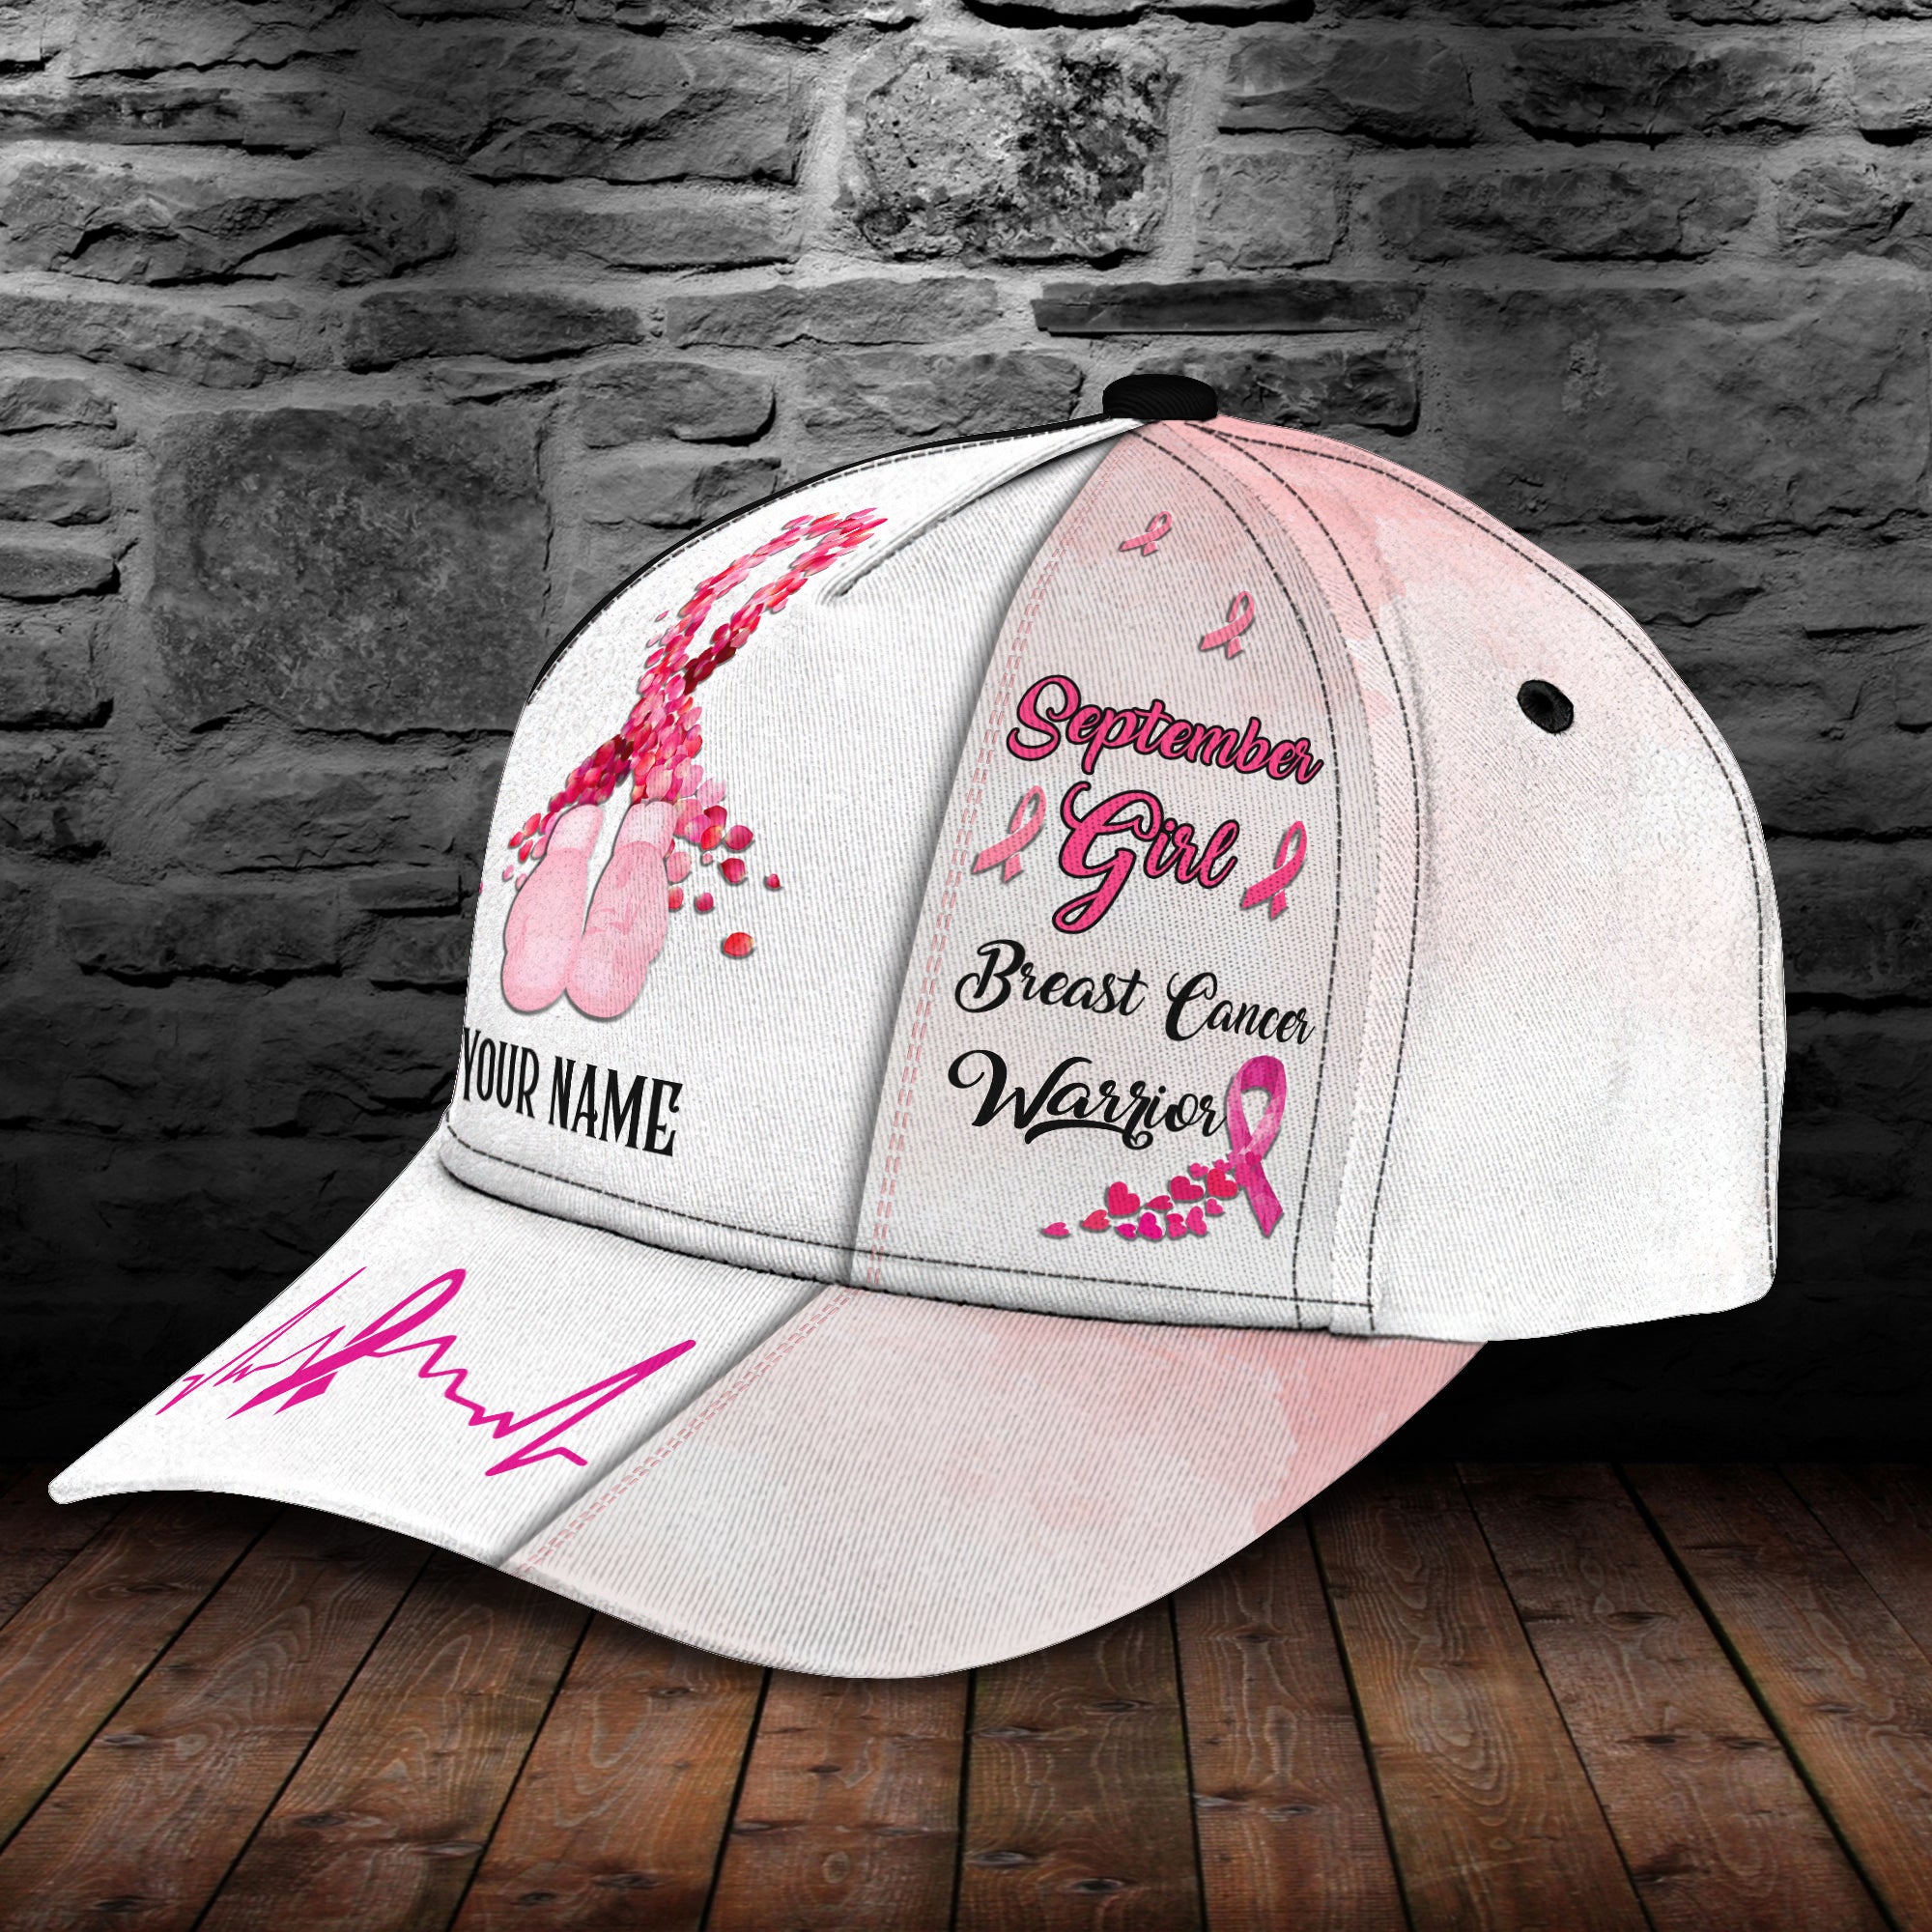 September Girl Breast Cancer Warrior - Personalized Name Cap - Nmd 31